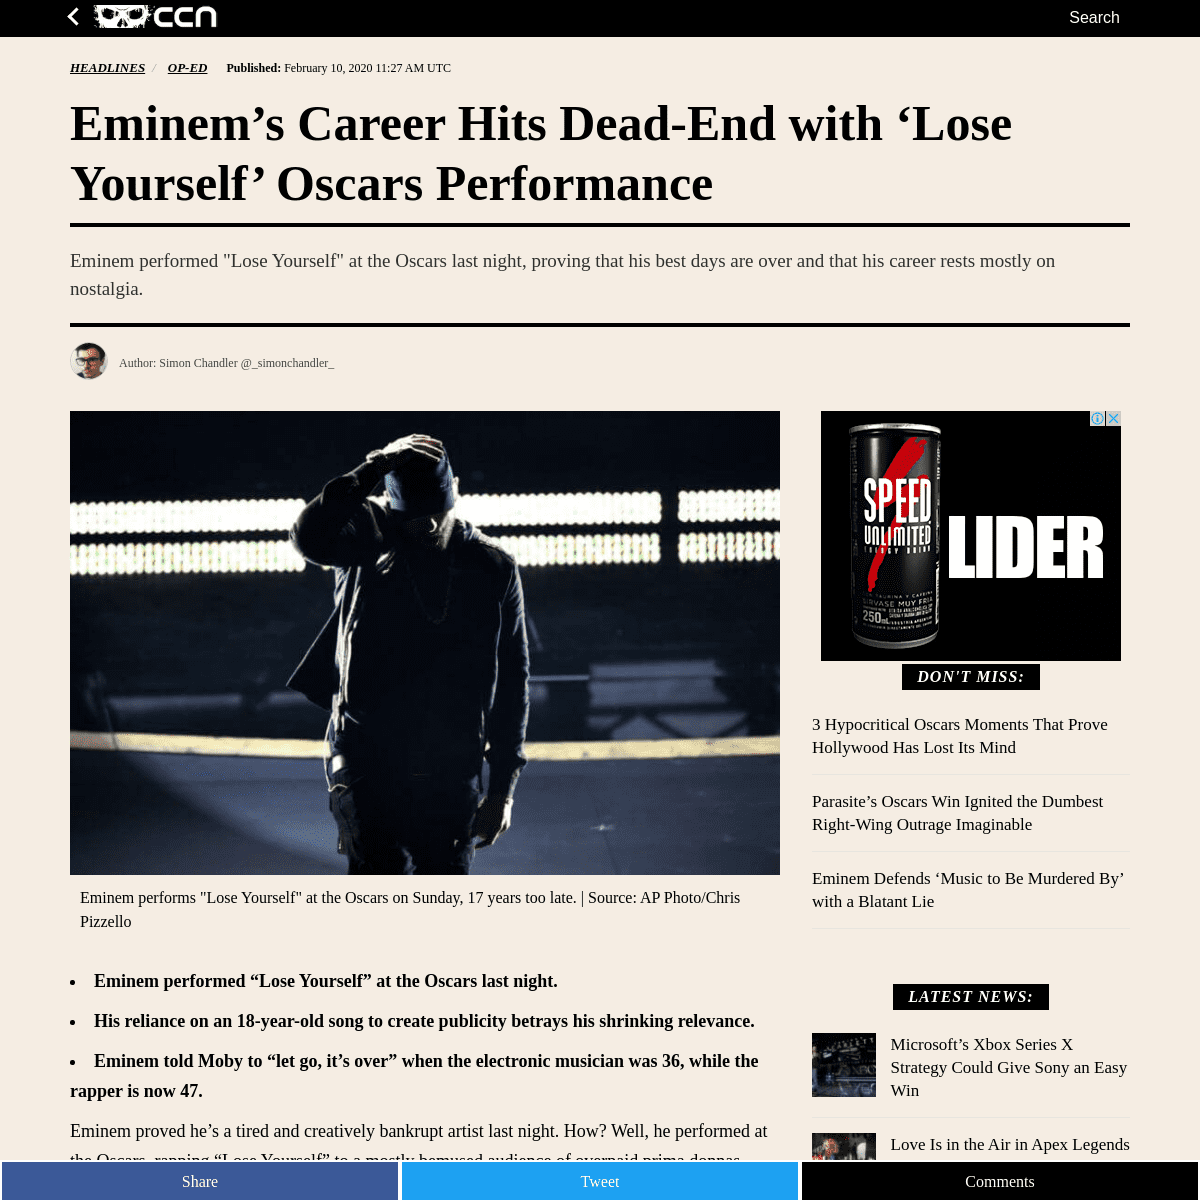 A complete backup of www.ccn.com/eminems-career-hits-dead-end-with-lose-yourself-oscars-performance/